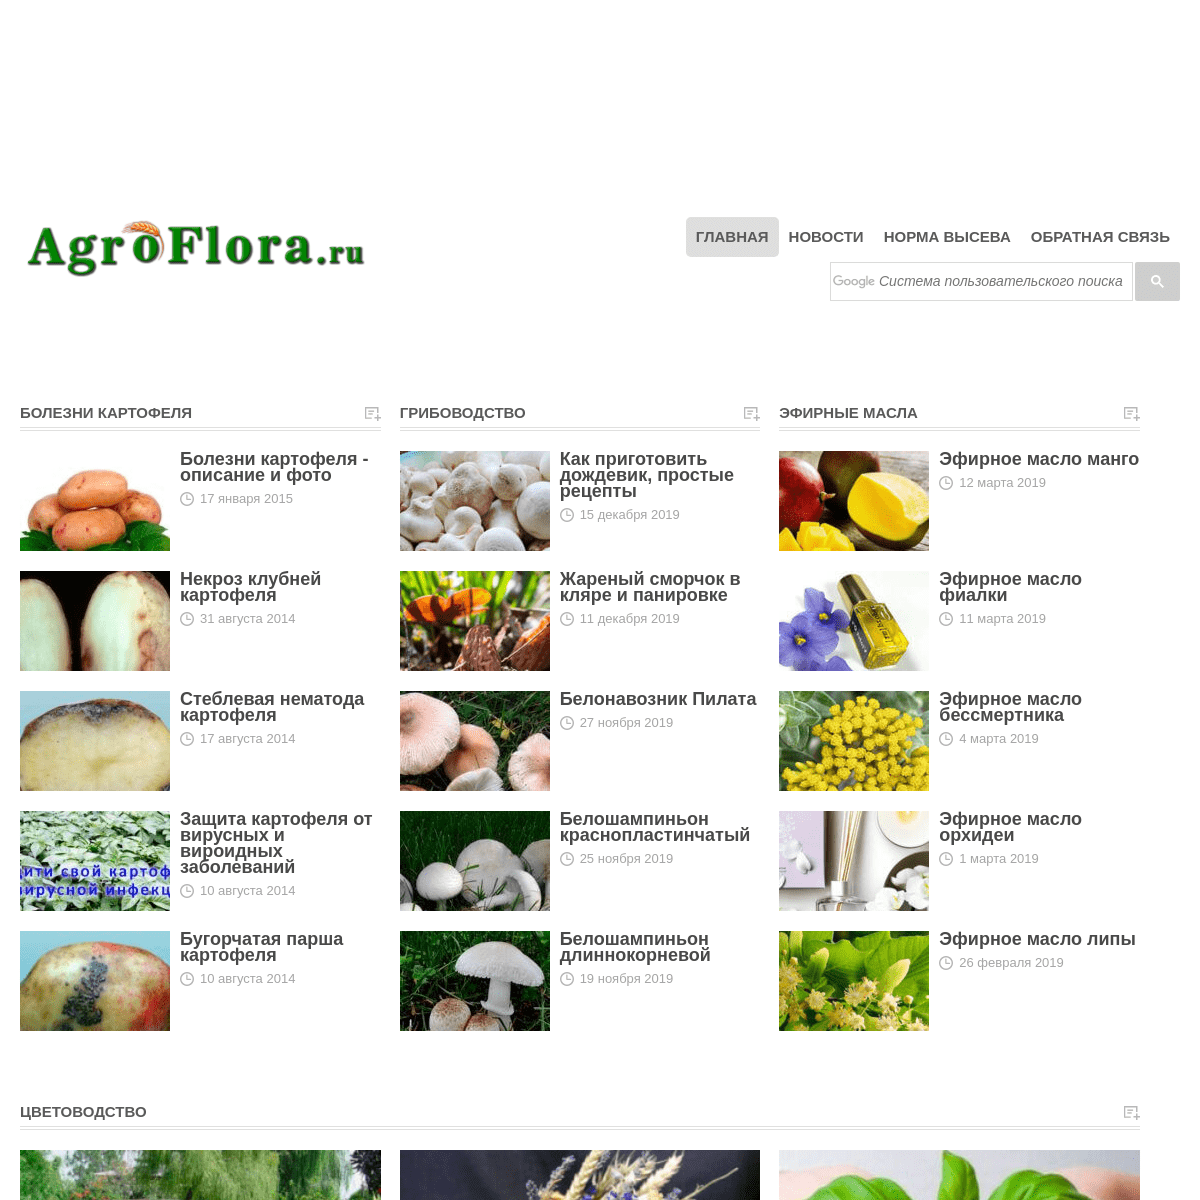 A complete backup of agroflora.ru